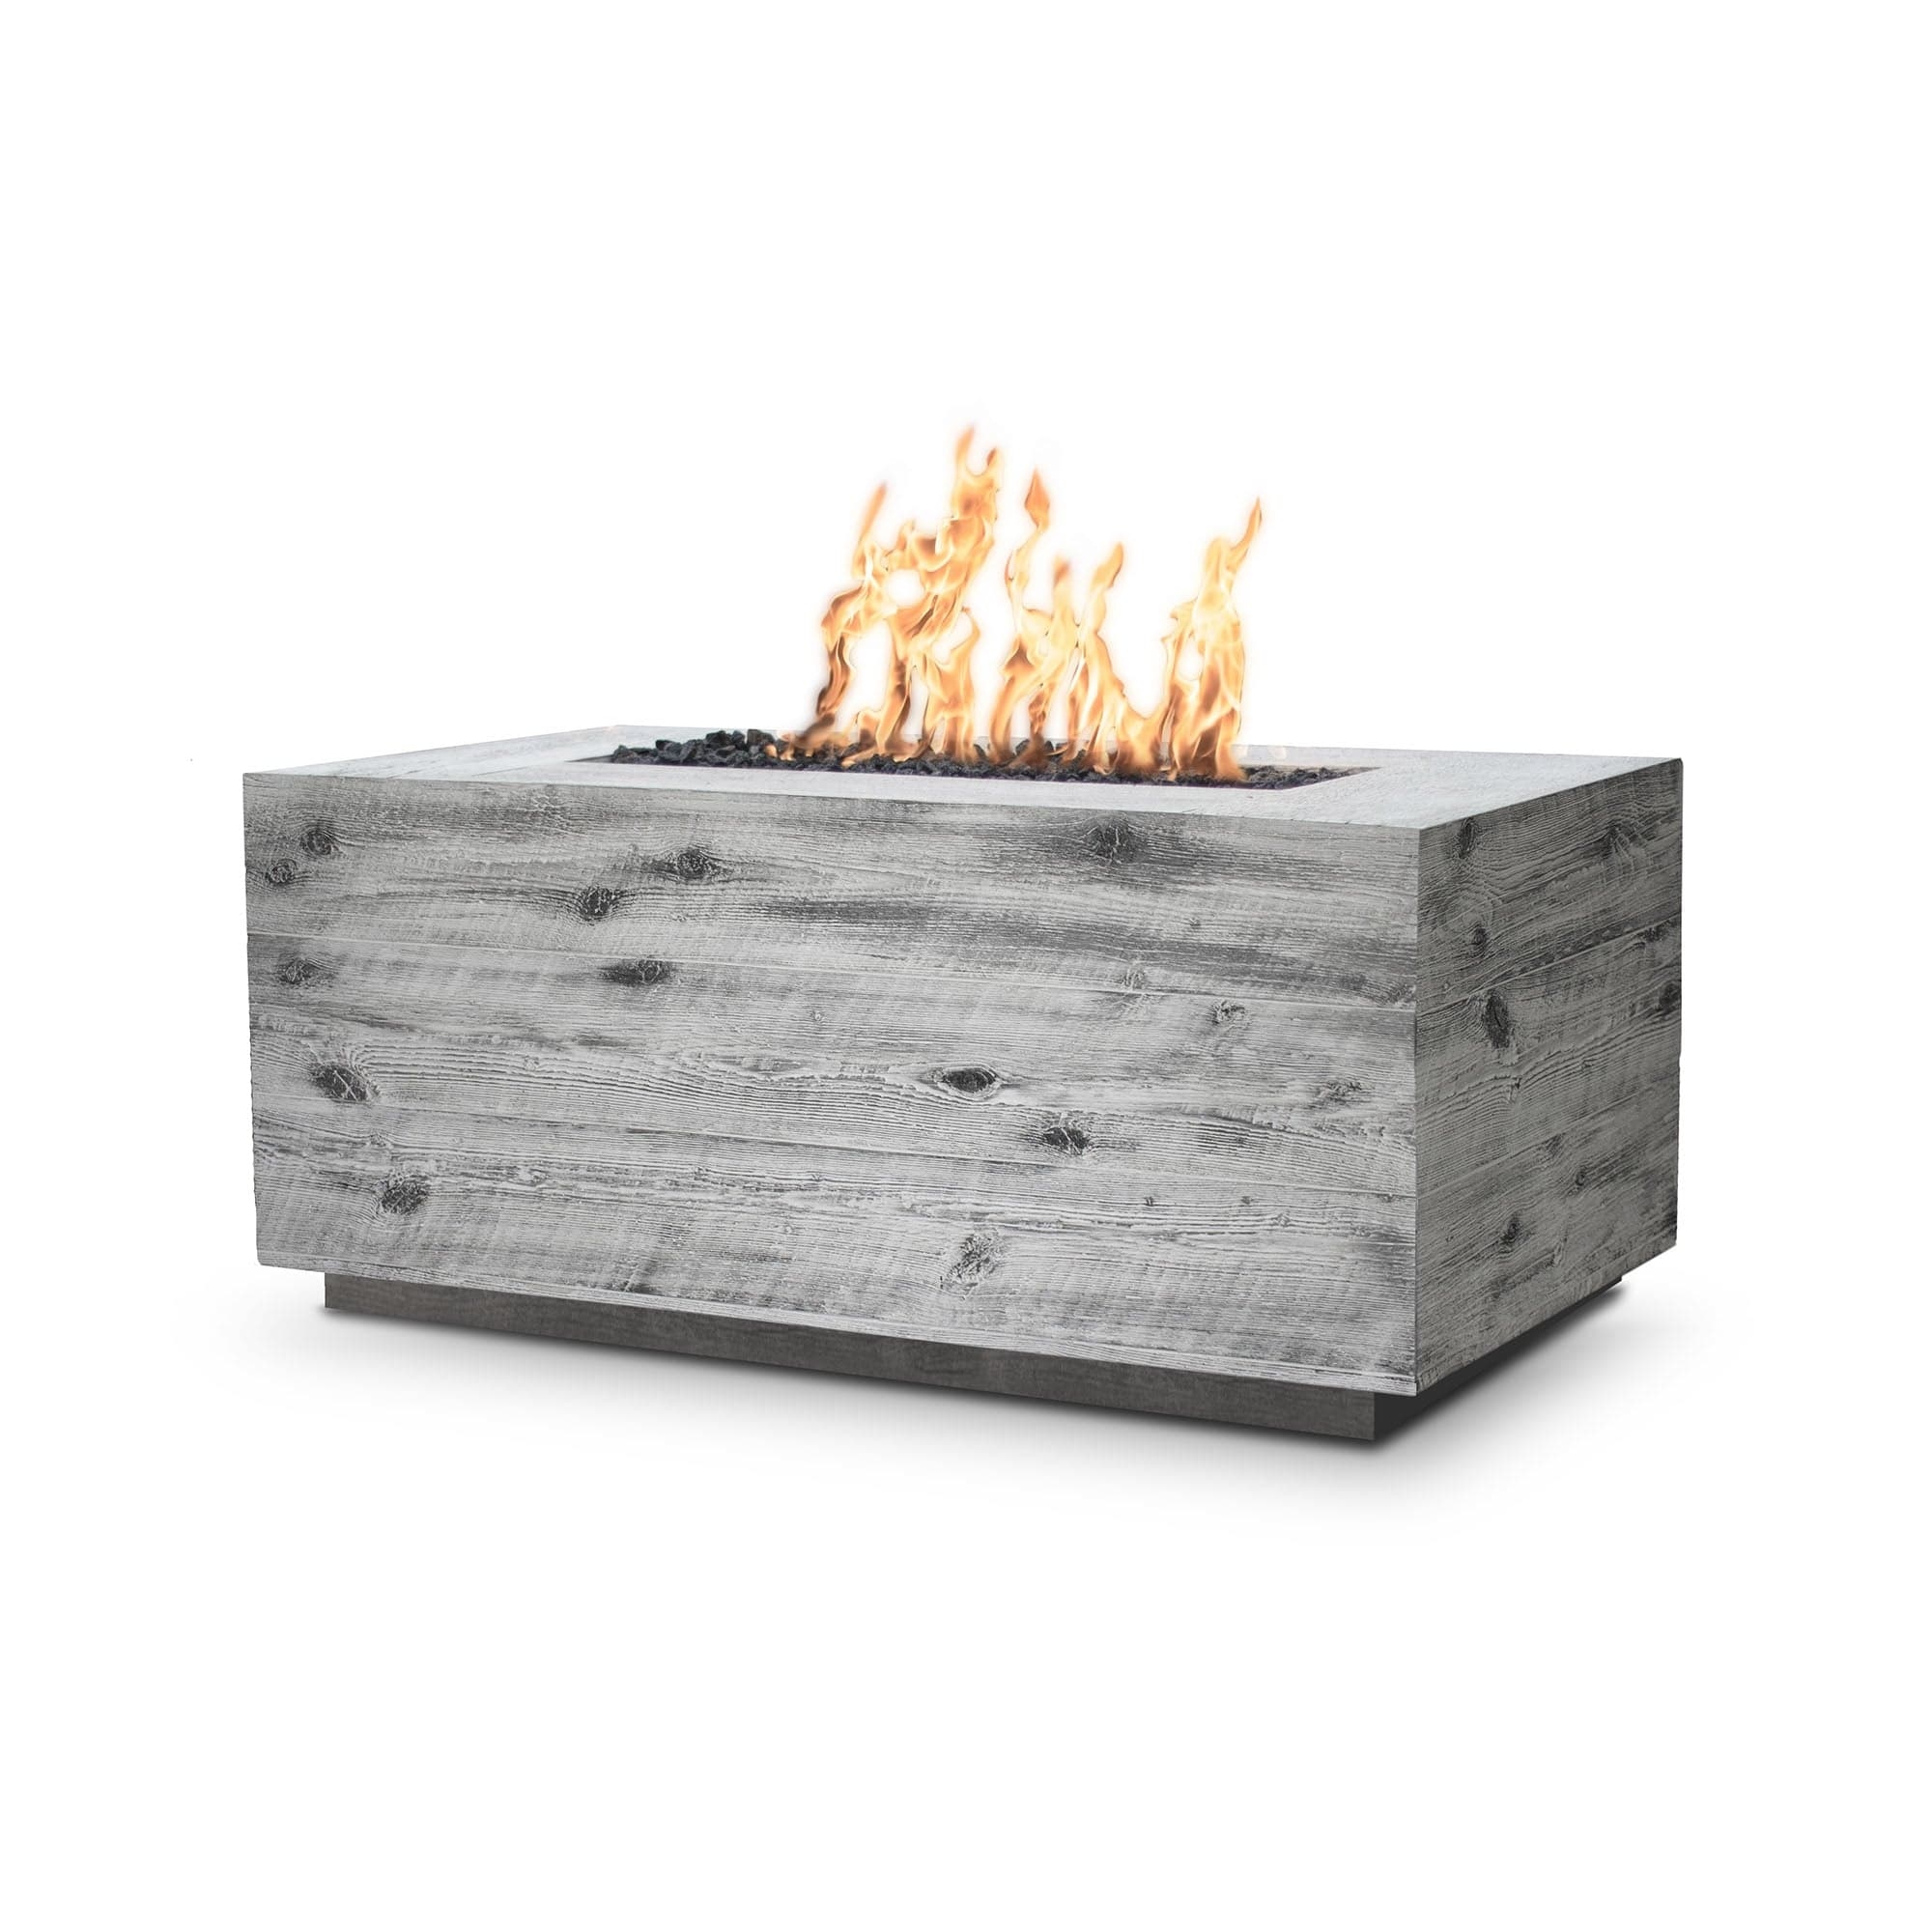 The Outdoor Plus Fire Pit 48" / Match Lit The Outdoor Plus Catalina Fire Pit | Wood Grain Concrete OPT-CTL48